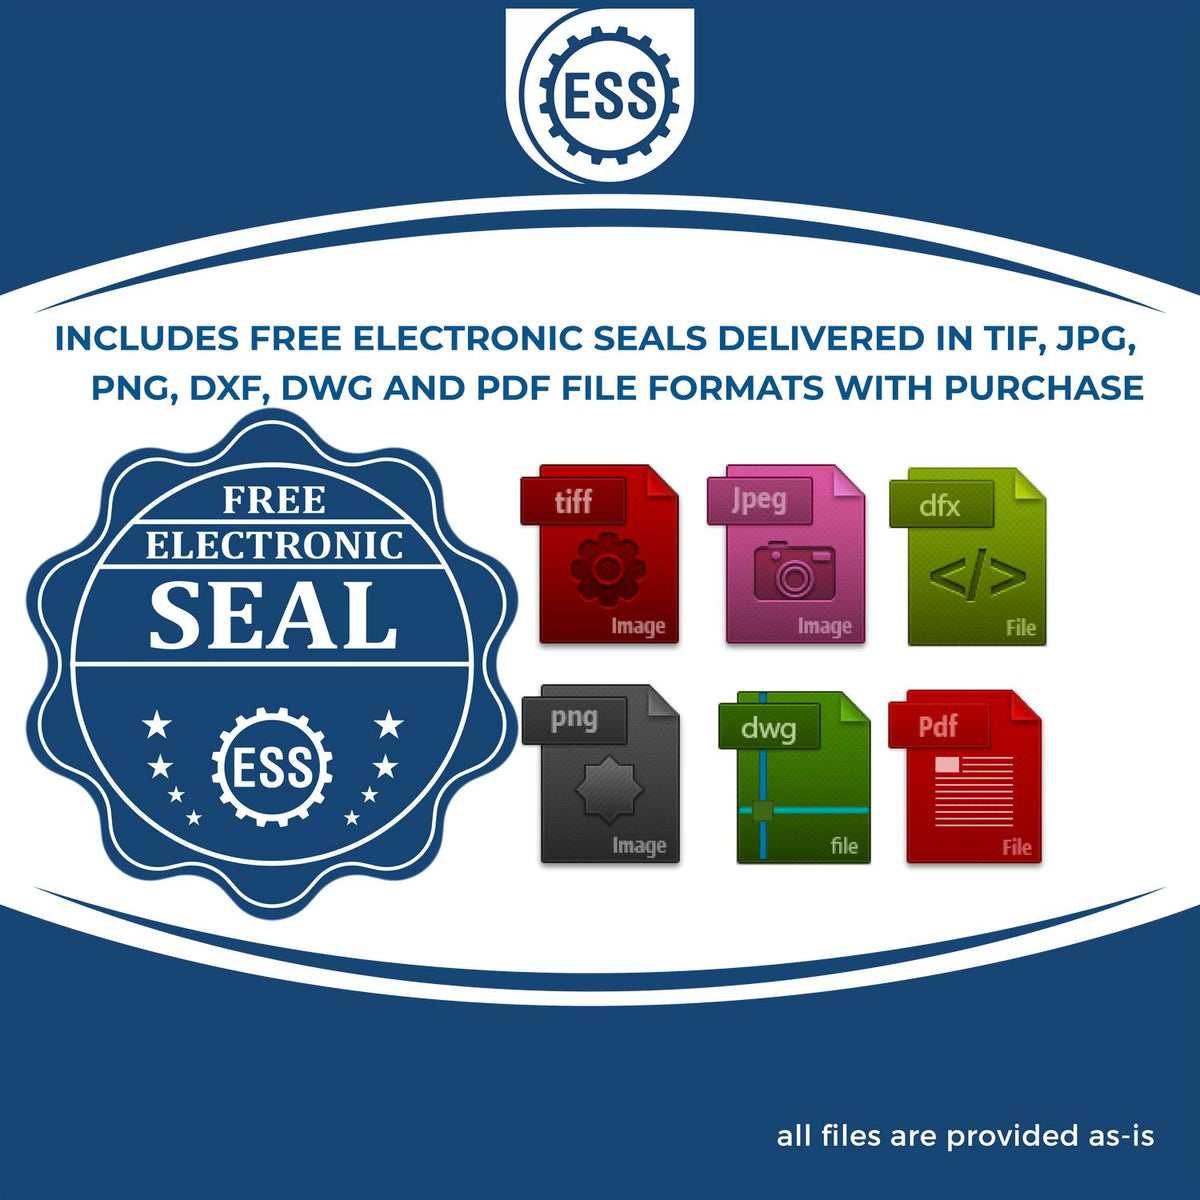 An infographic for the free electronic seal for the Extended Long Reach Montana Surveyor Embosser illustrating the different file type icons such as DXF, DWG, TIF, JPG and PNG.